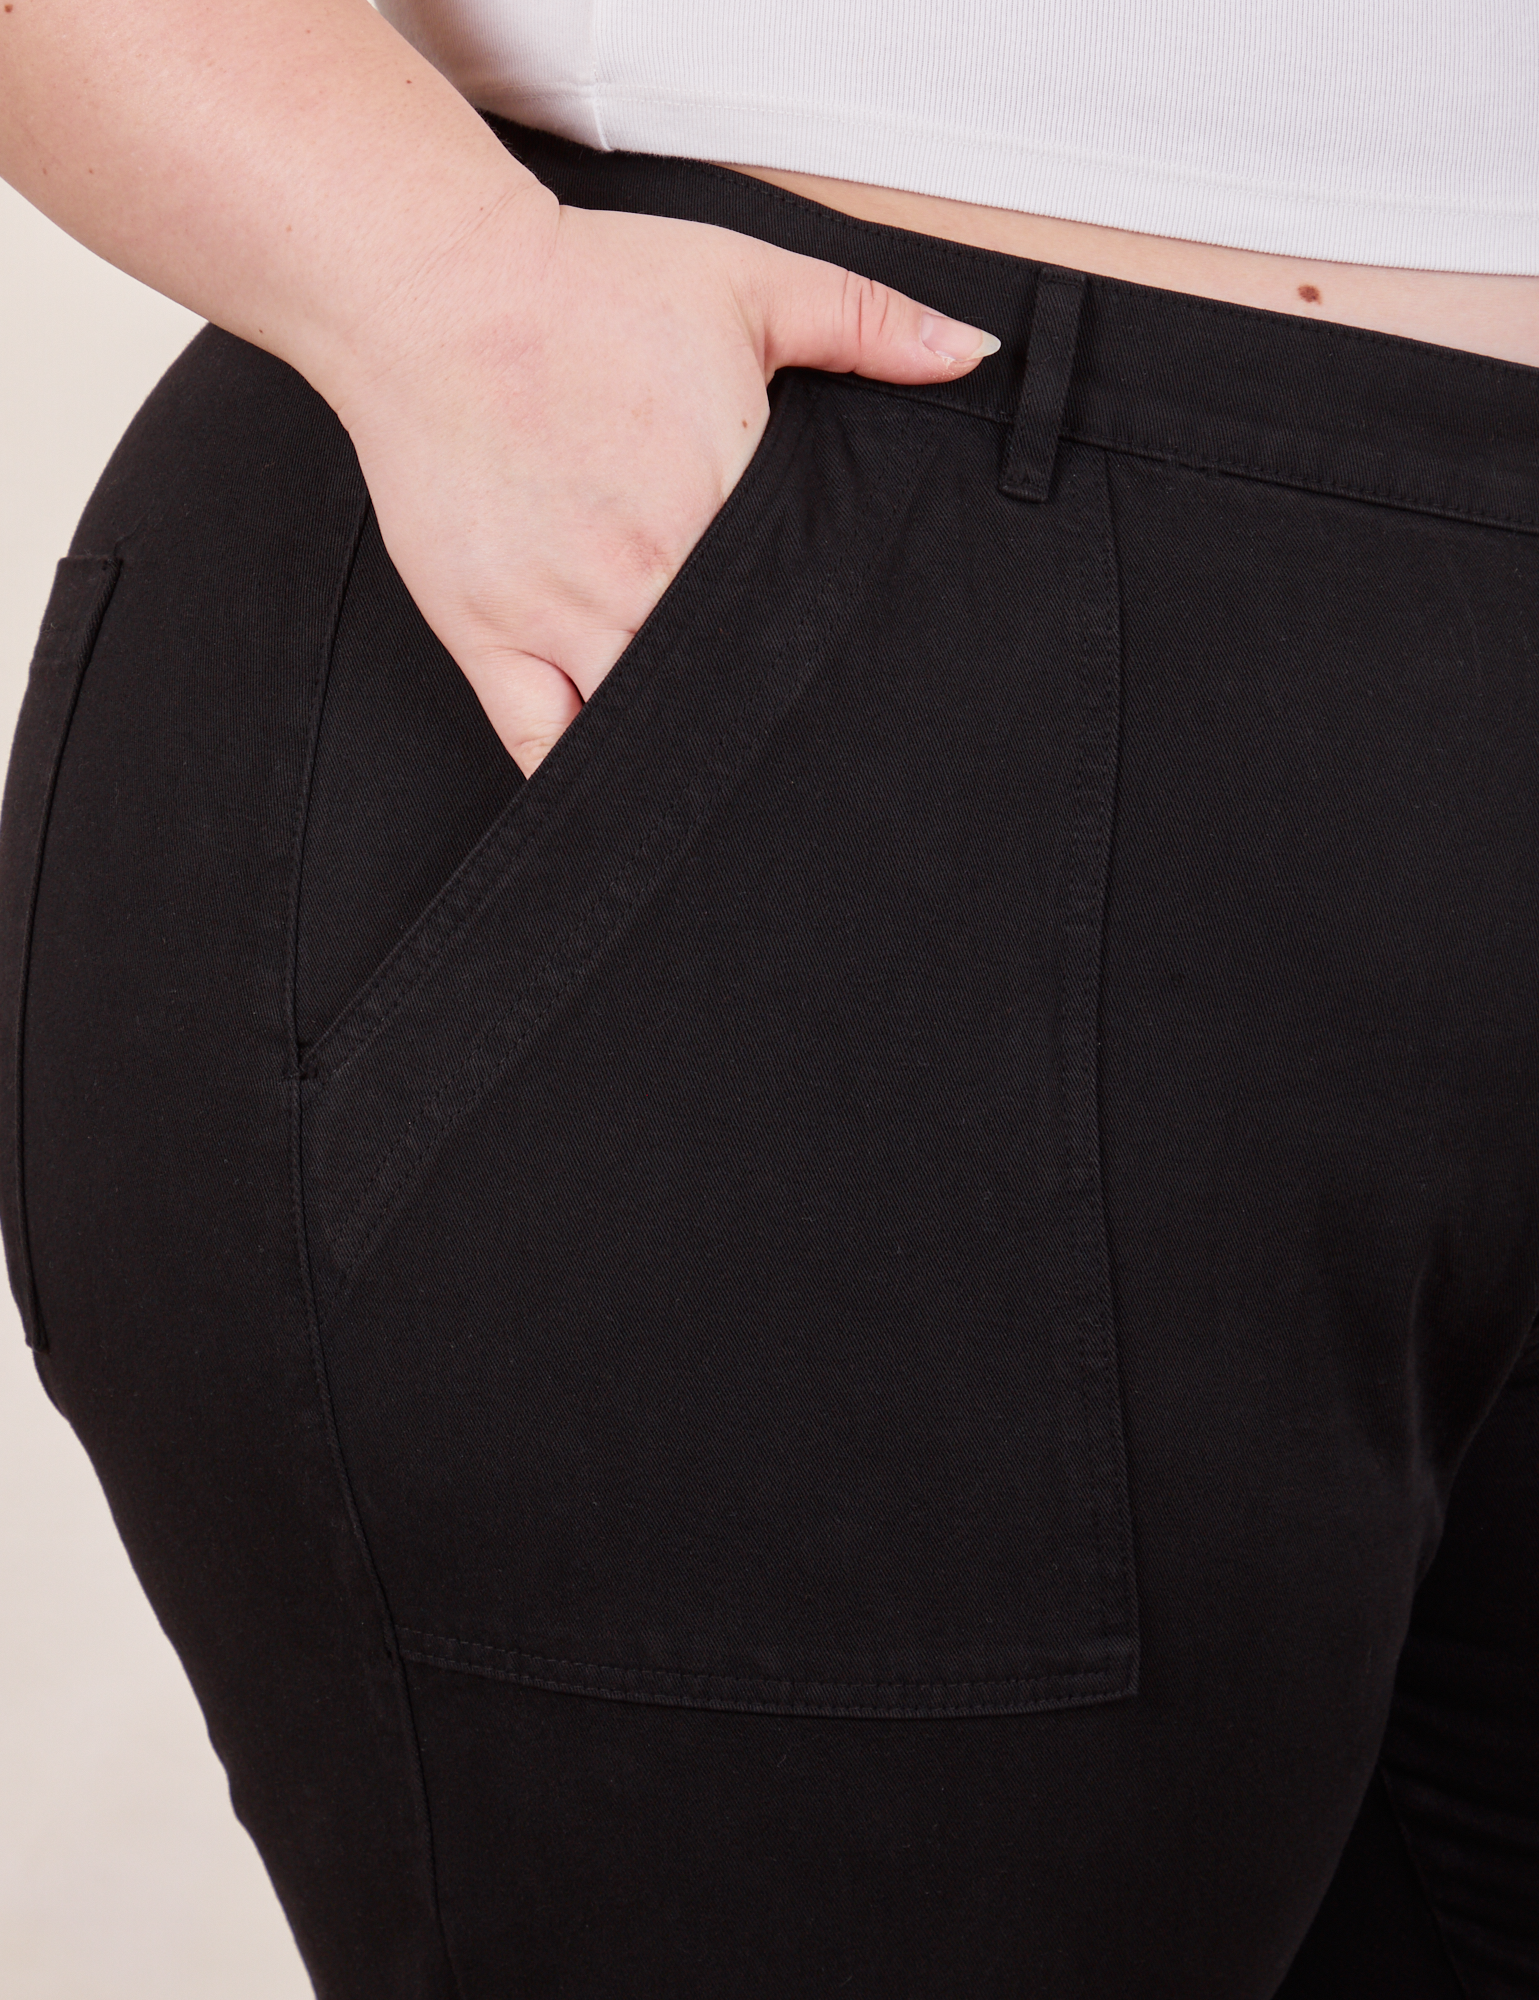 Petite Pencil Pants in Basic Black front pocket close up. Ashley has her hand in the pocket.